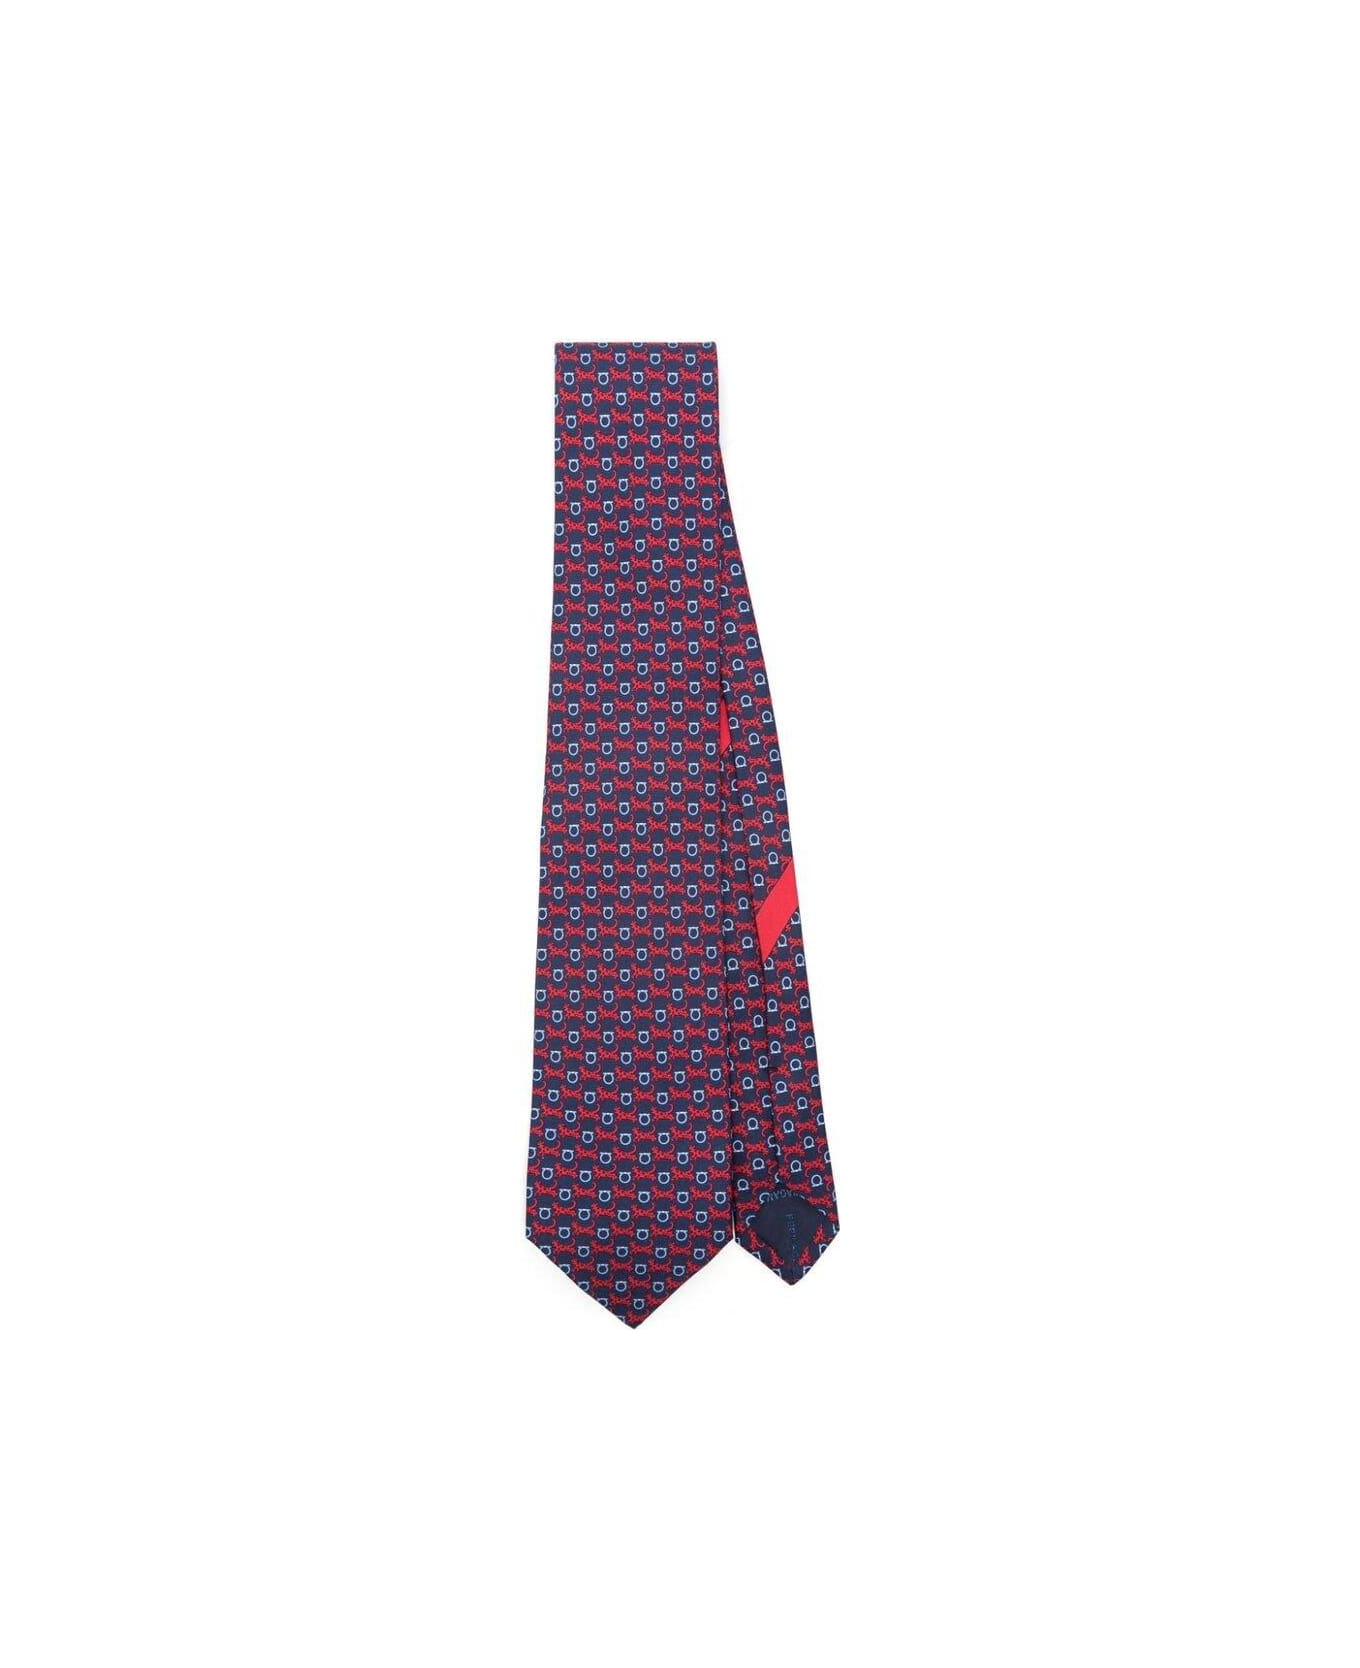 Ferragamo All-over Patterned Tie - BLUE/RED ネクタイ